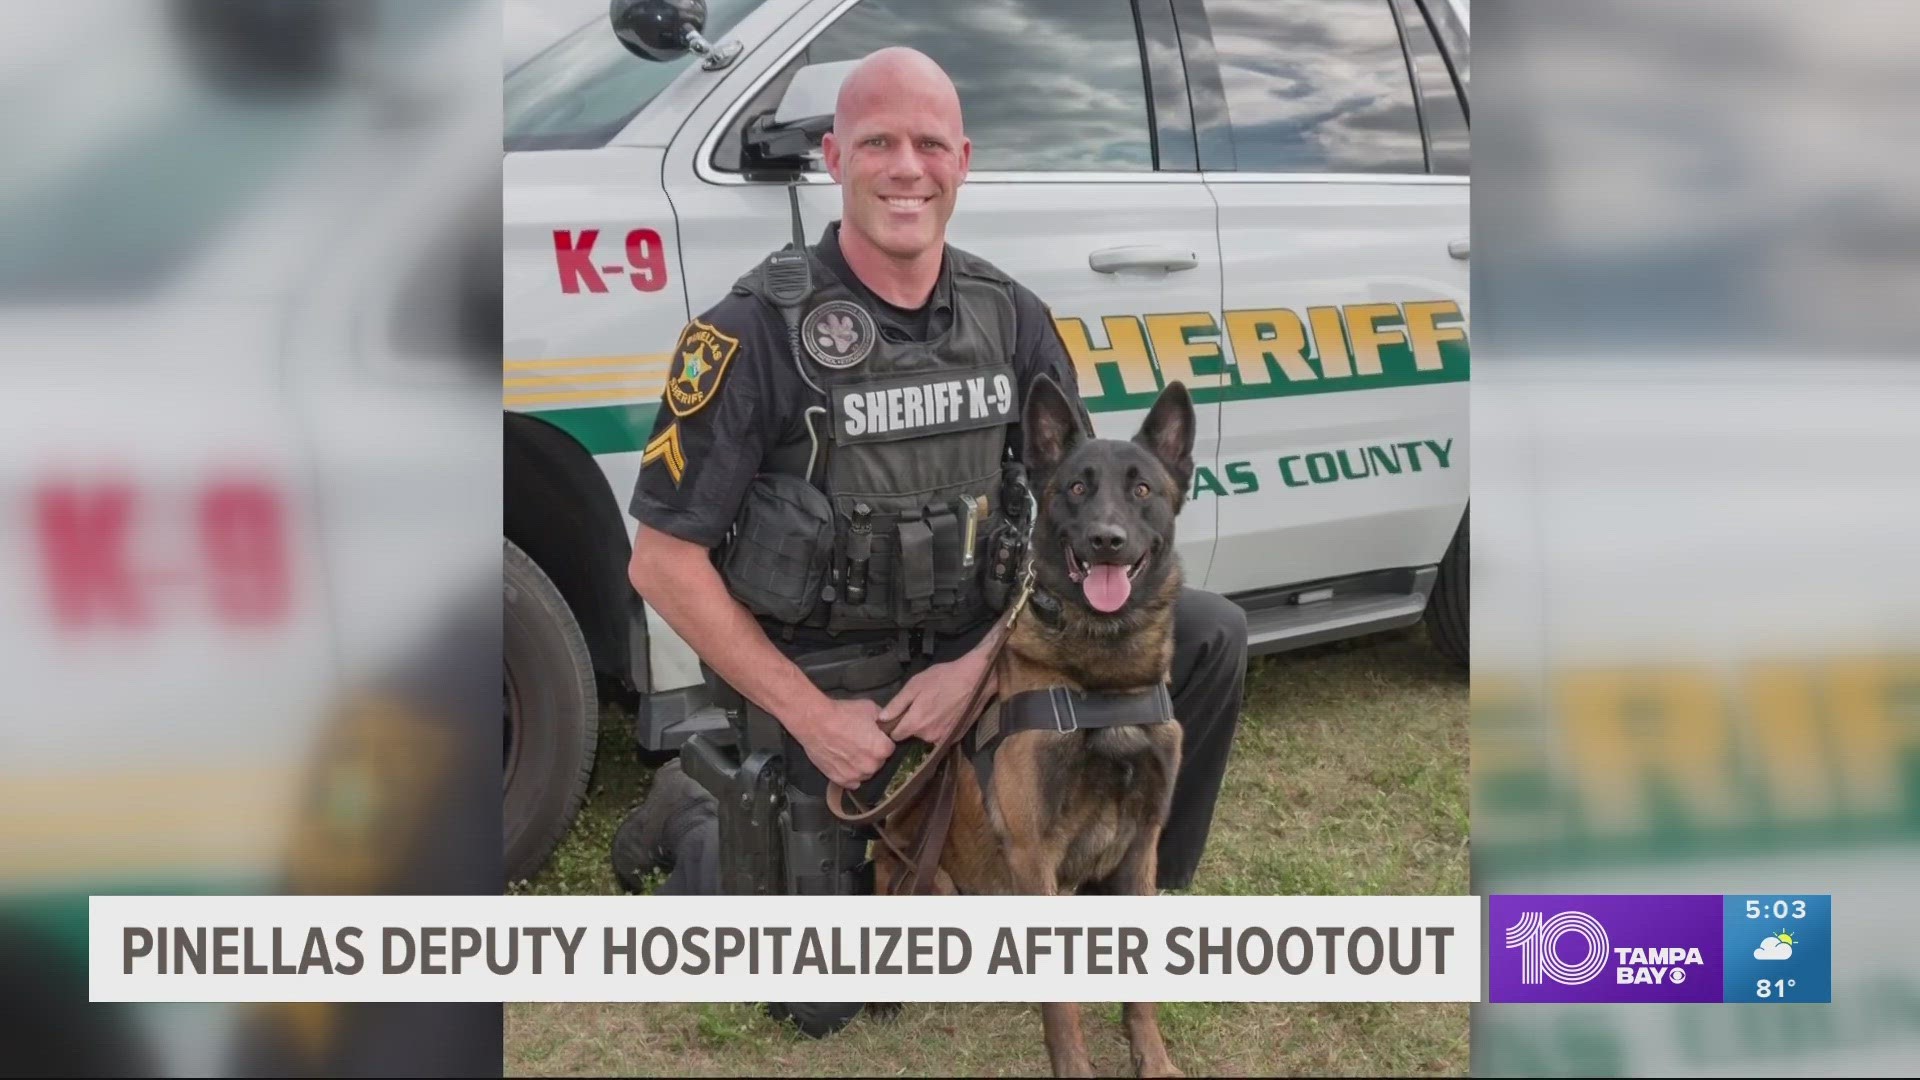 The deputy shot Sunday is still recovering in the hospital after surgery, the St. Petersburg Police Department explains.